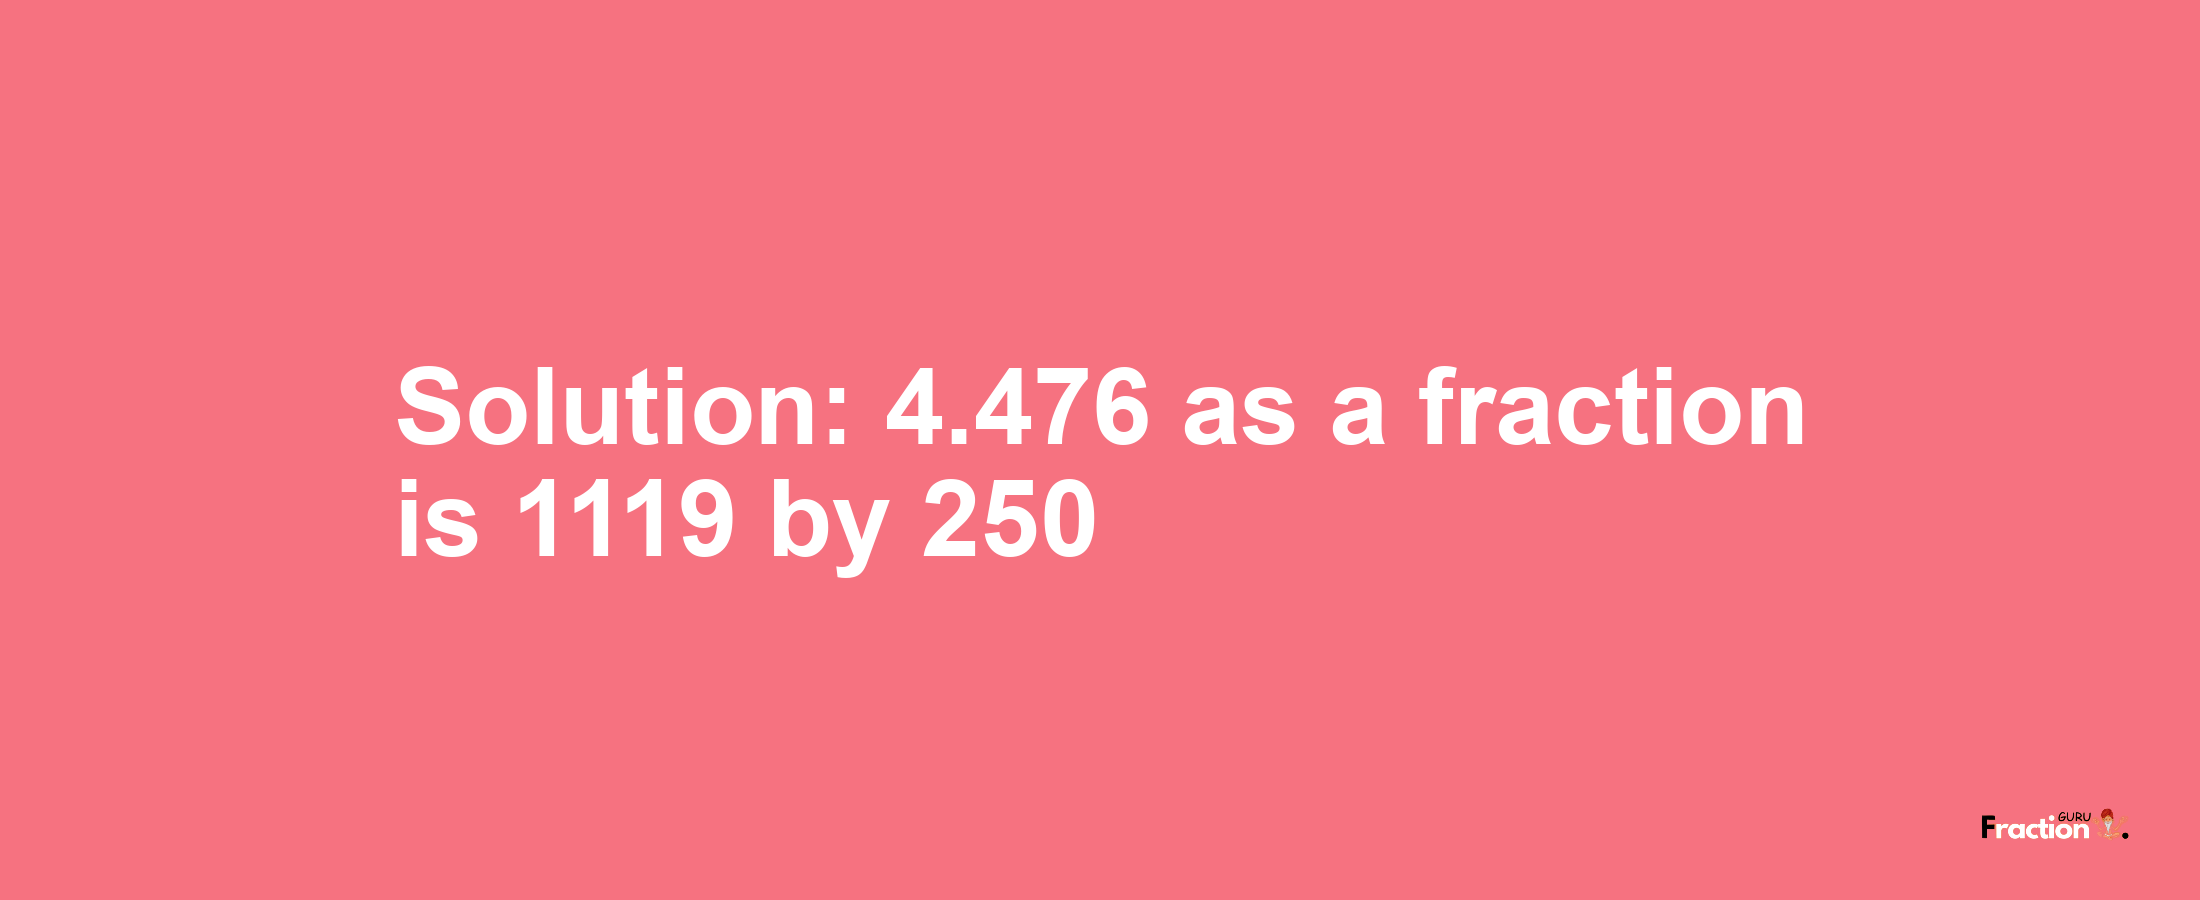 Solution:4.476 as a fraction is 1119/250